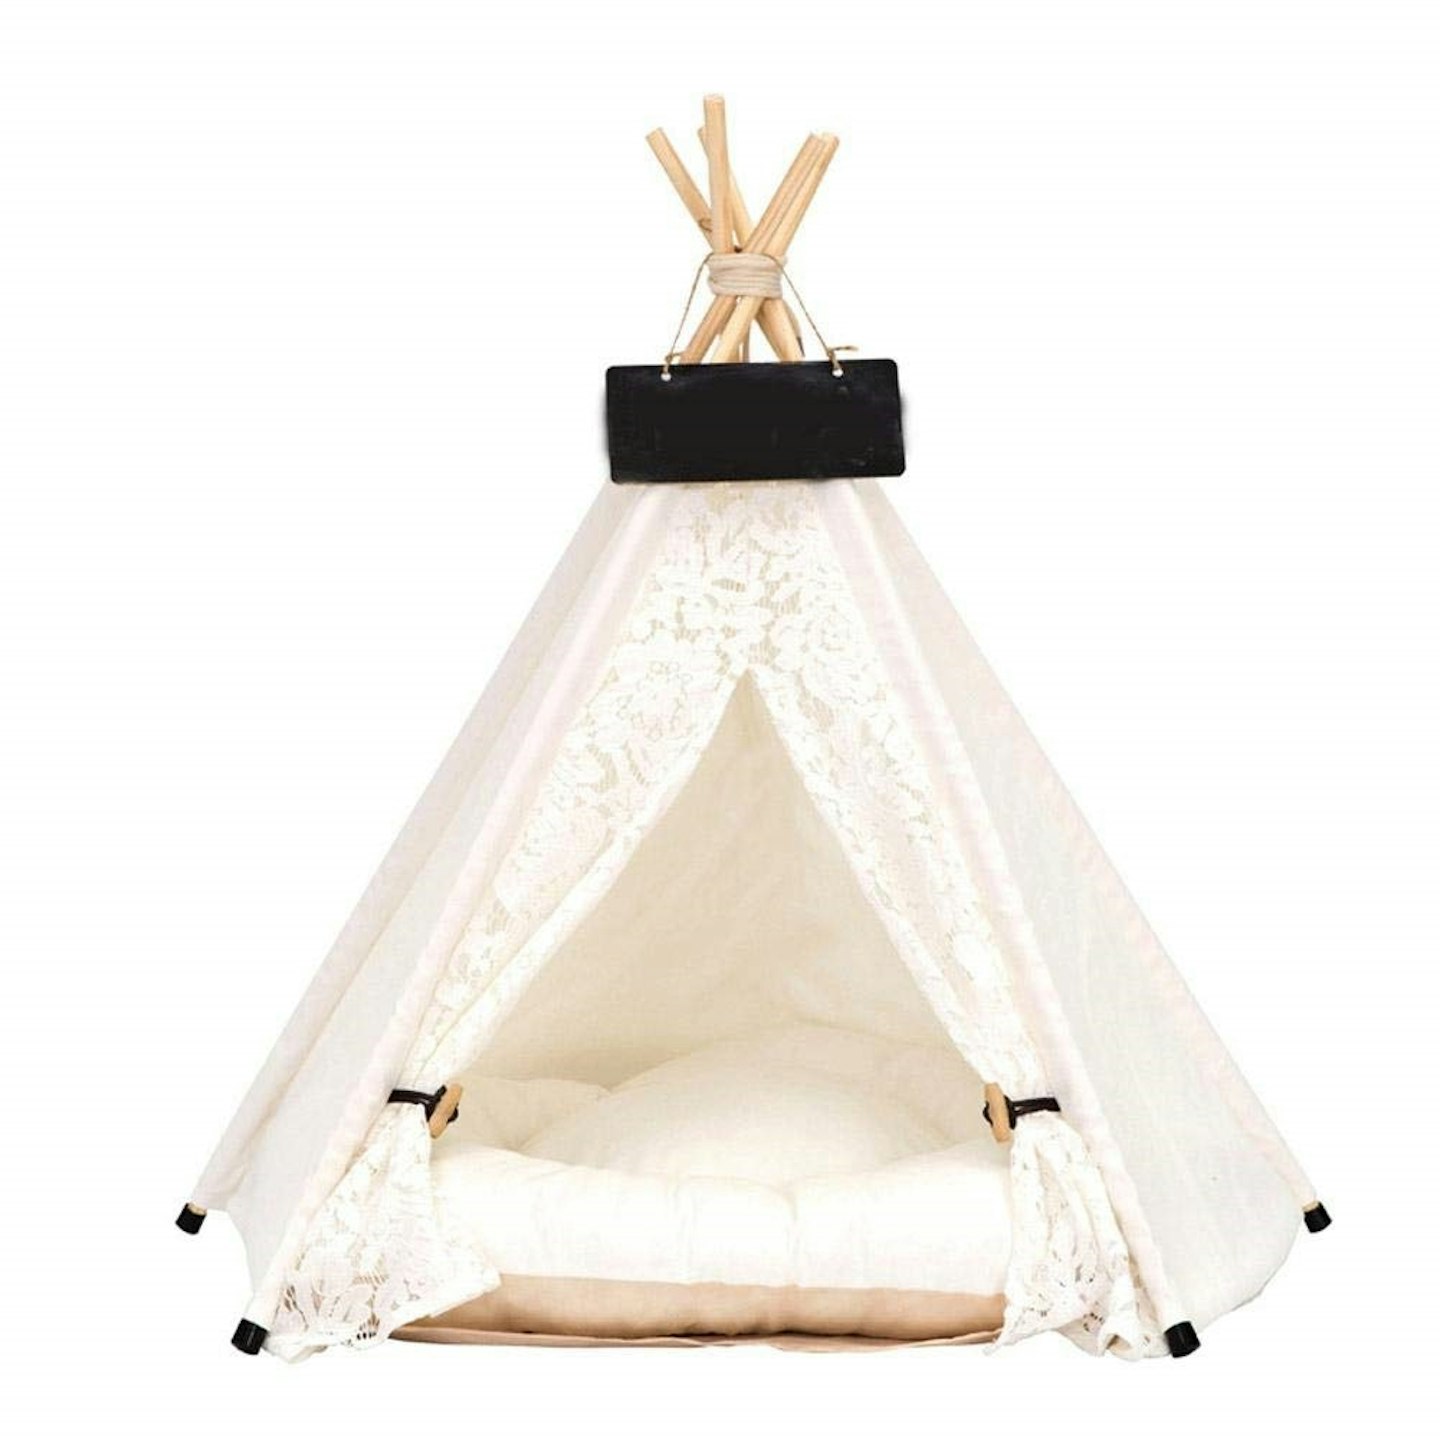 Zhuotop Pet Tepee Play House with Cushion